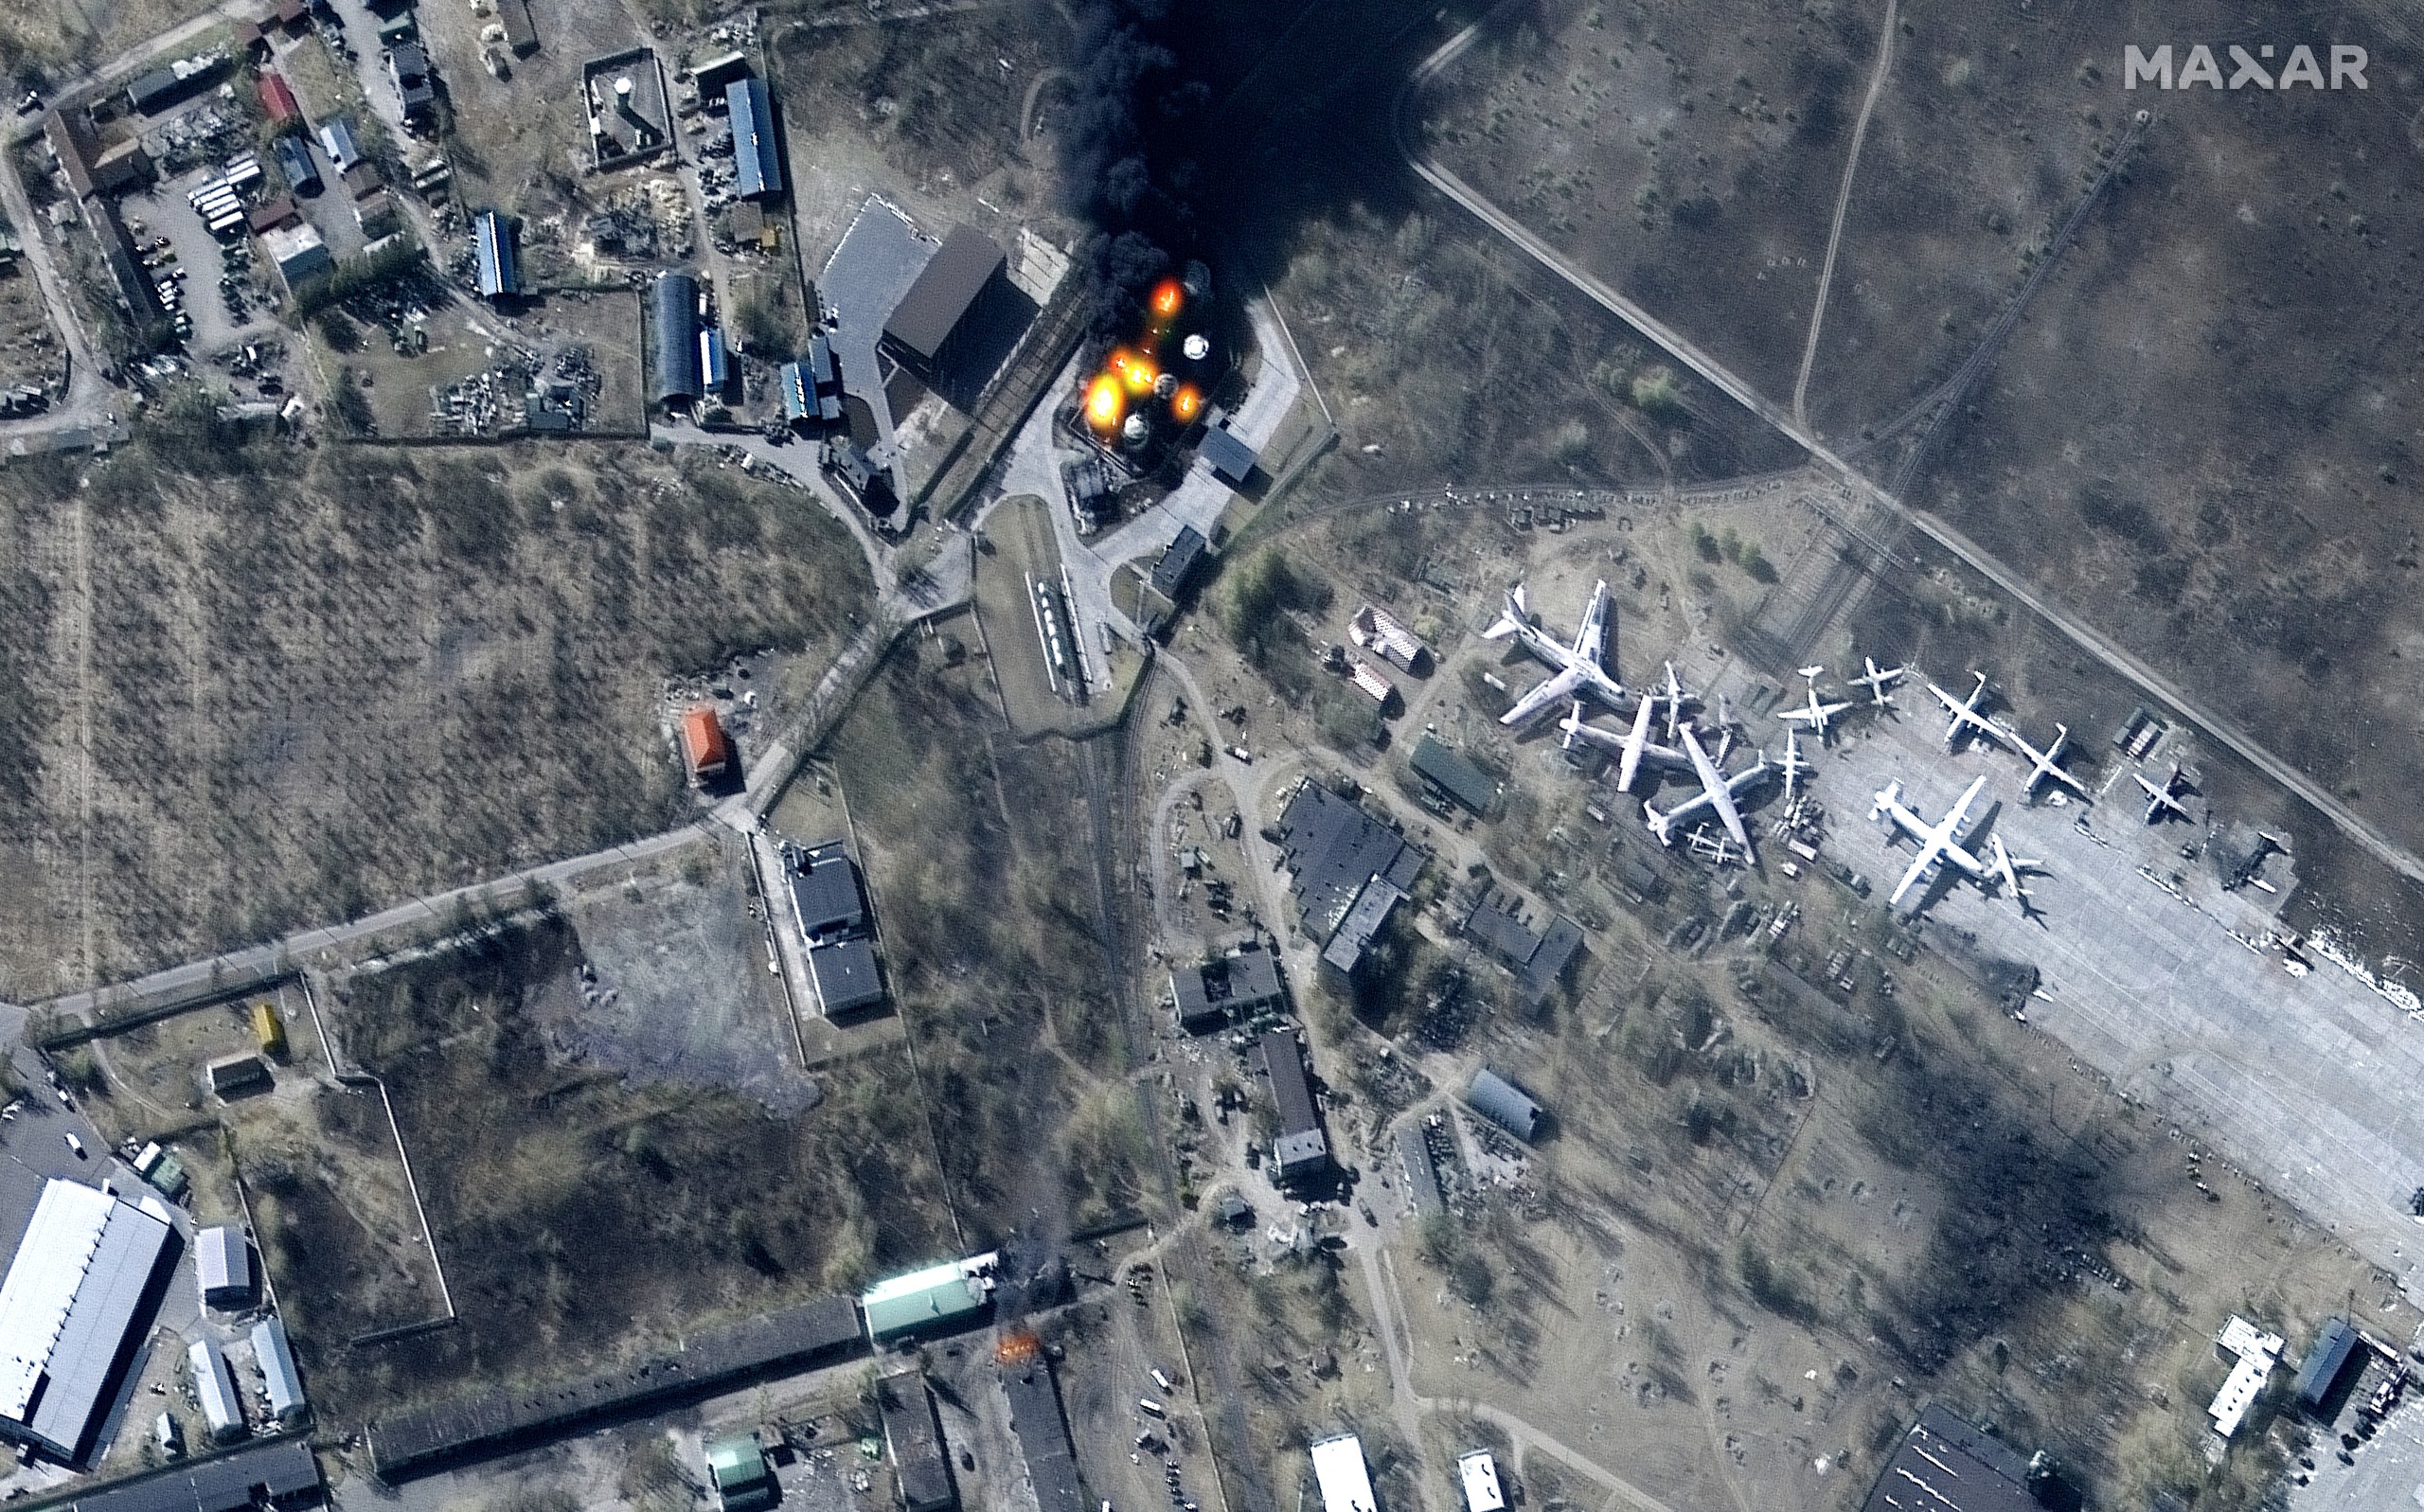 epa09818283 A handout multispectral satellite image made available by Maxar Technologies shows buildings and fuel storage tanks on fire at Antonov Airport, Hostomel, Ukraine, 11 March 2022.  EPA/MAXAR TECHNOLOGIES HANDOUT -- MANDATORY CREDIT: SATELLITE IMAGE 2022 MAXAR TECHNOLOGIES -- THE WATERMARK MAY NOT BE REMOVED/CROPPED -- HANDOUT EDITORIAL USE ONLY/NO SALES